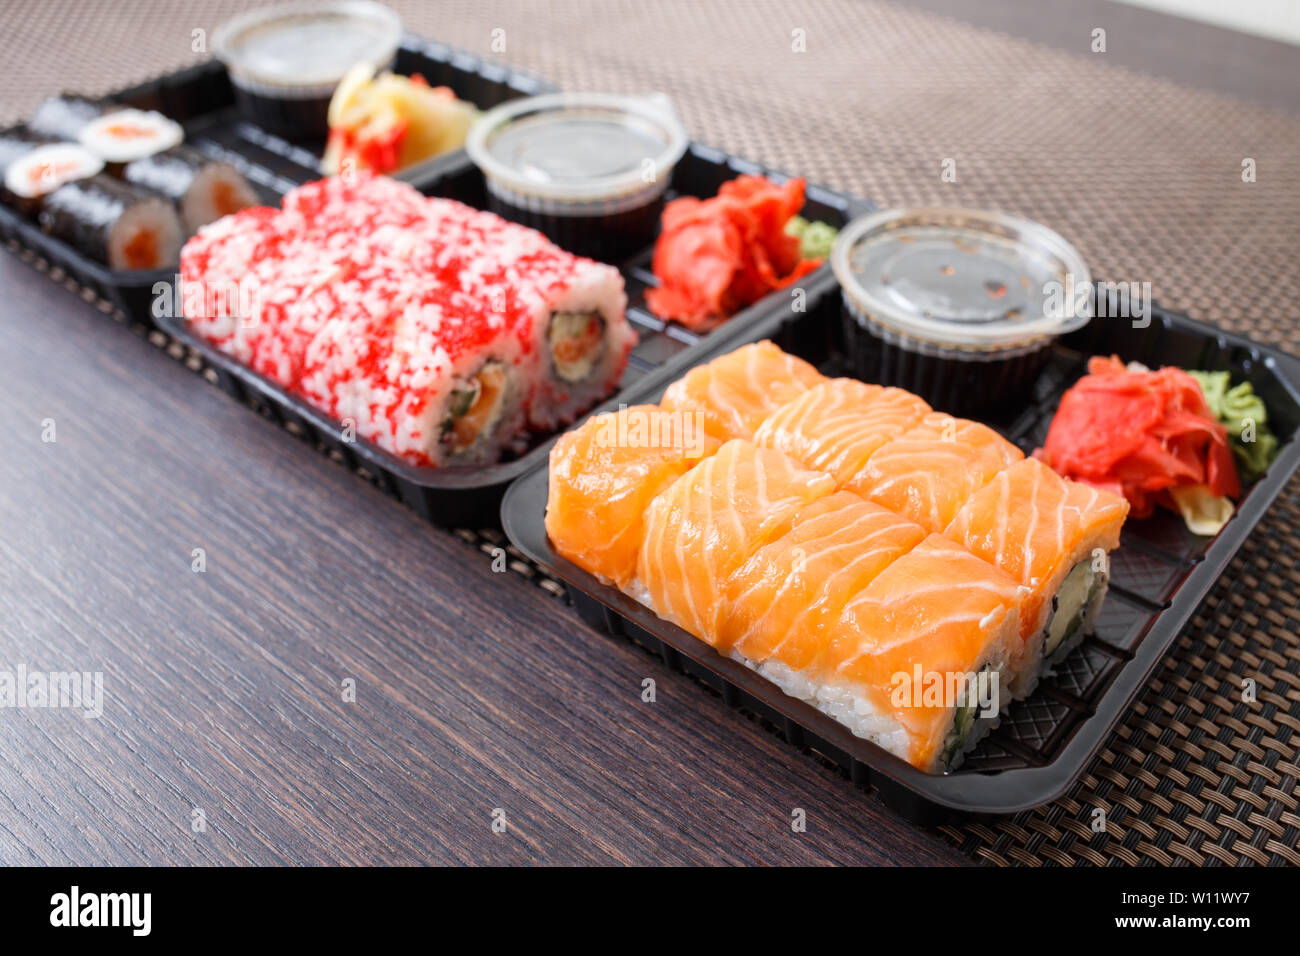 Takeaway sushi set fast food delivery close up concept image Stock Photo